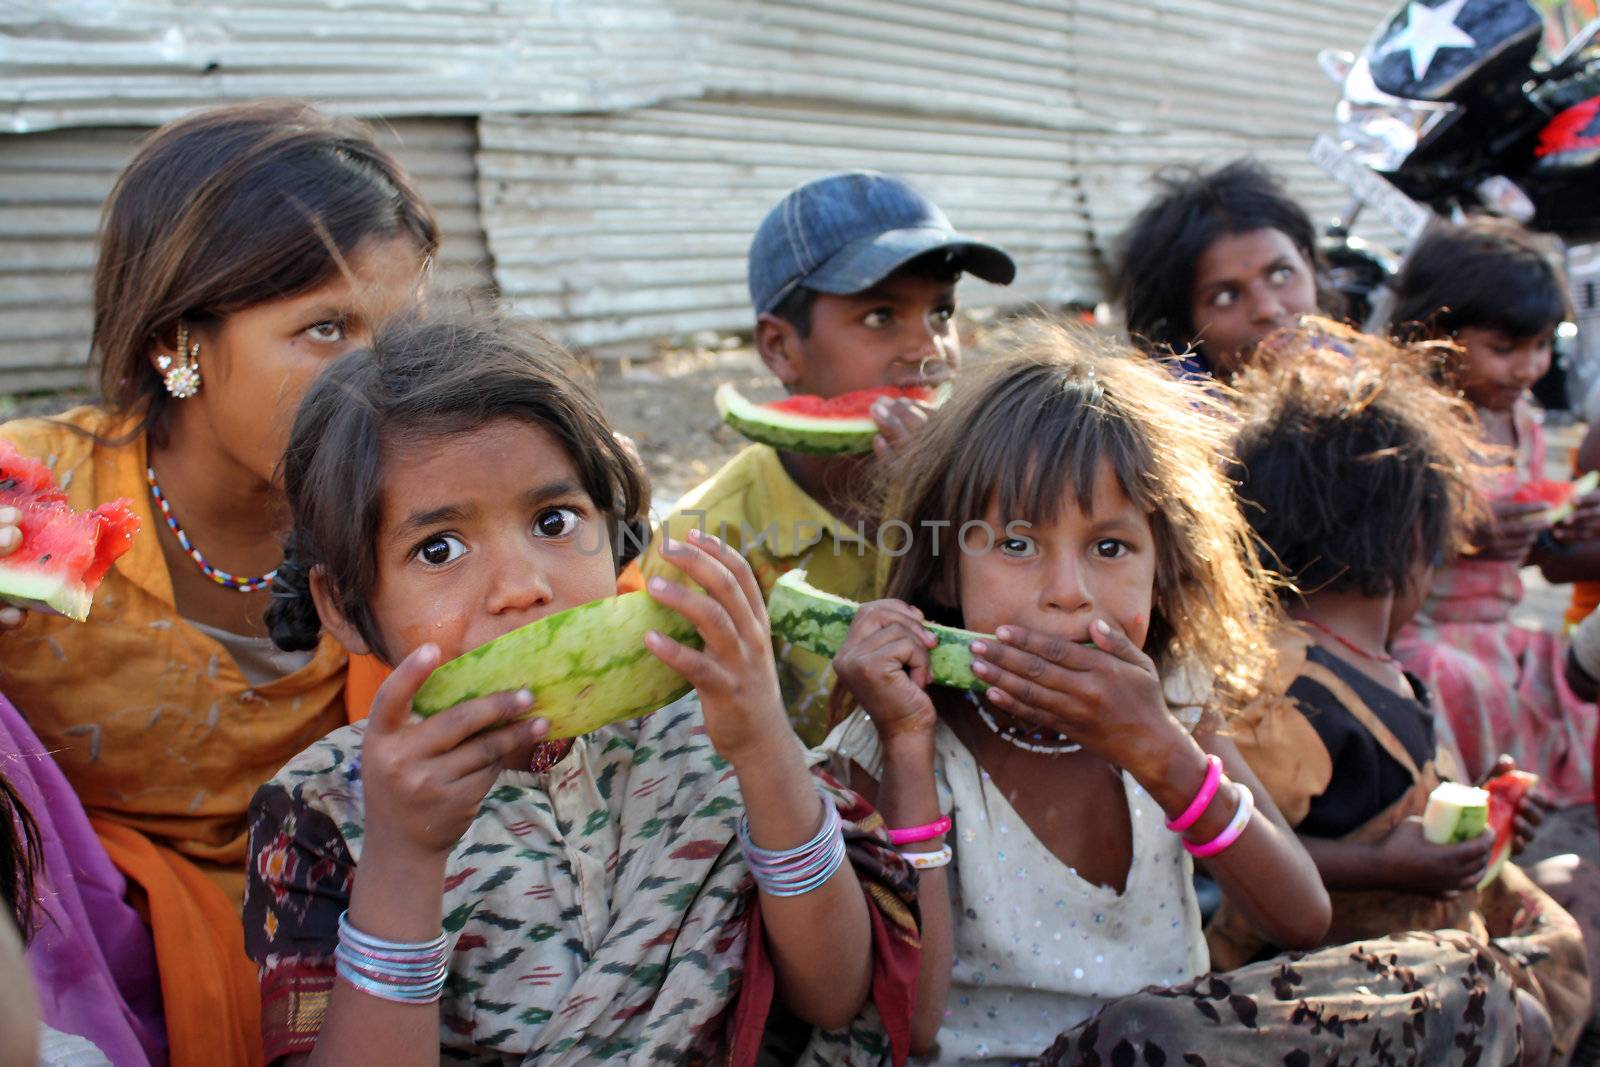 A poor girl in India eating a eatermelon along with her other family who spend their time begging on the streets. Focus on the eyes of the girl in front.